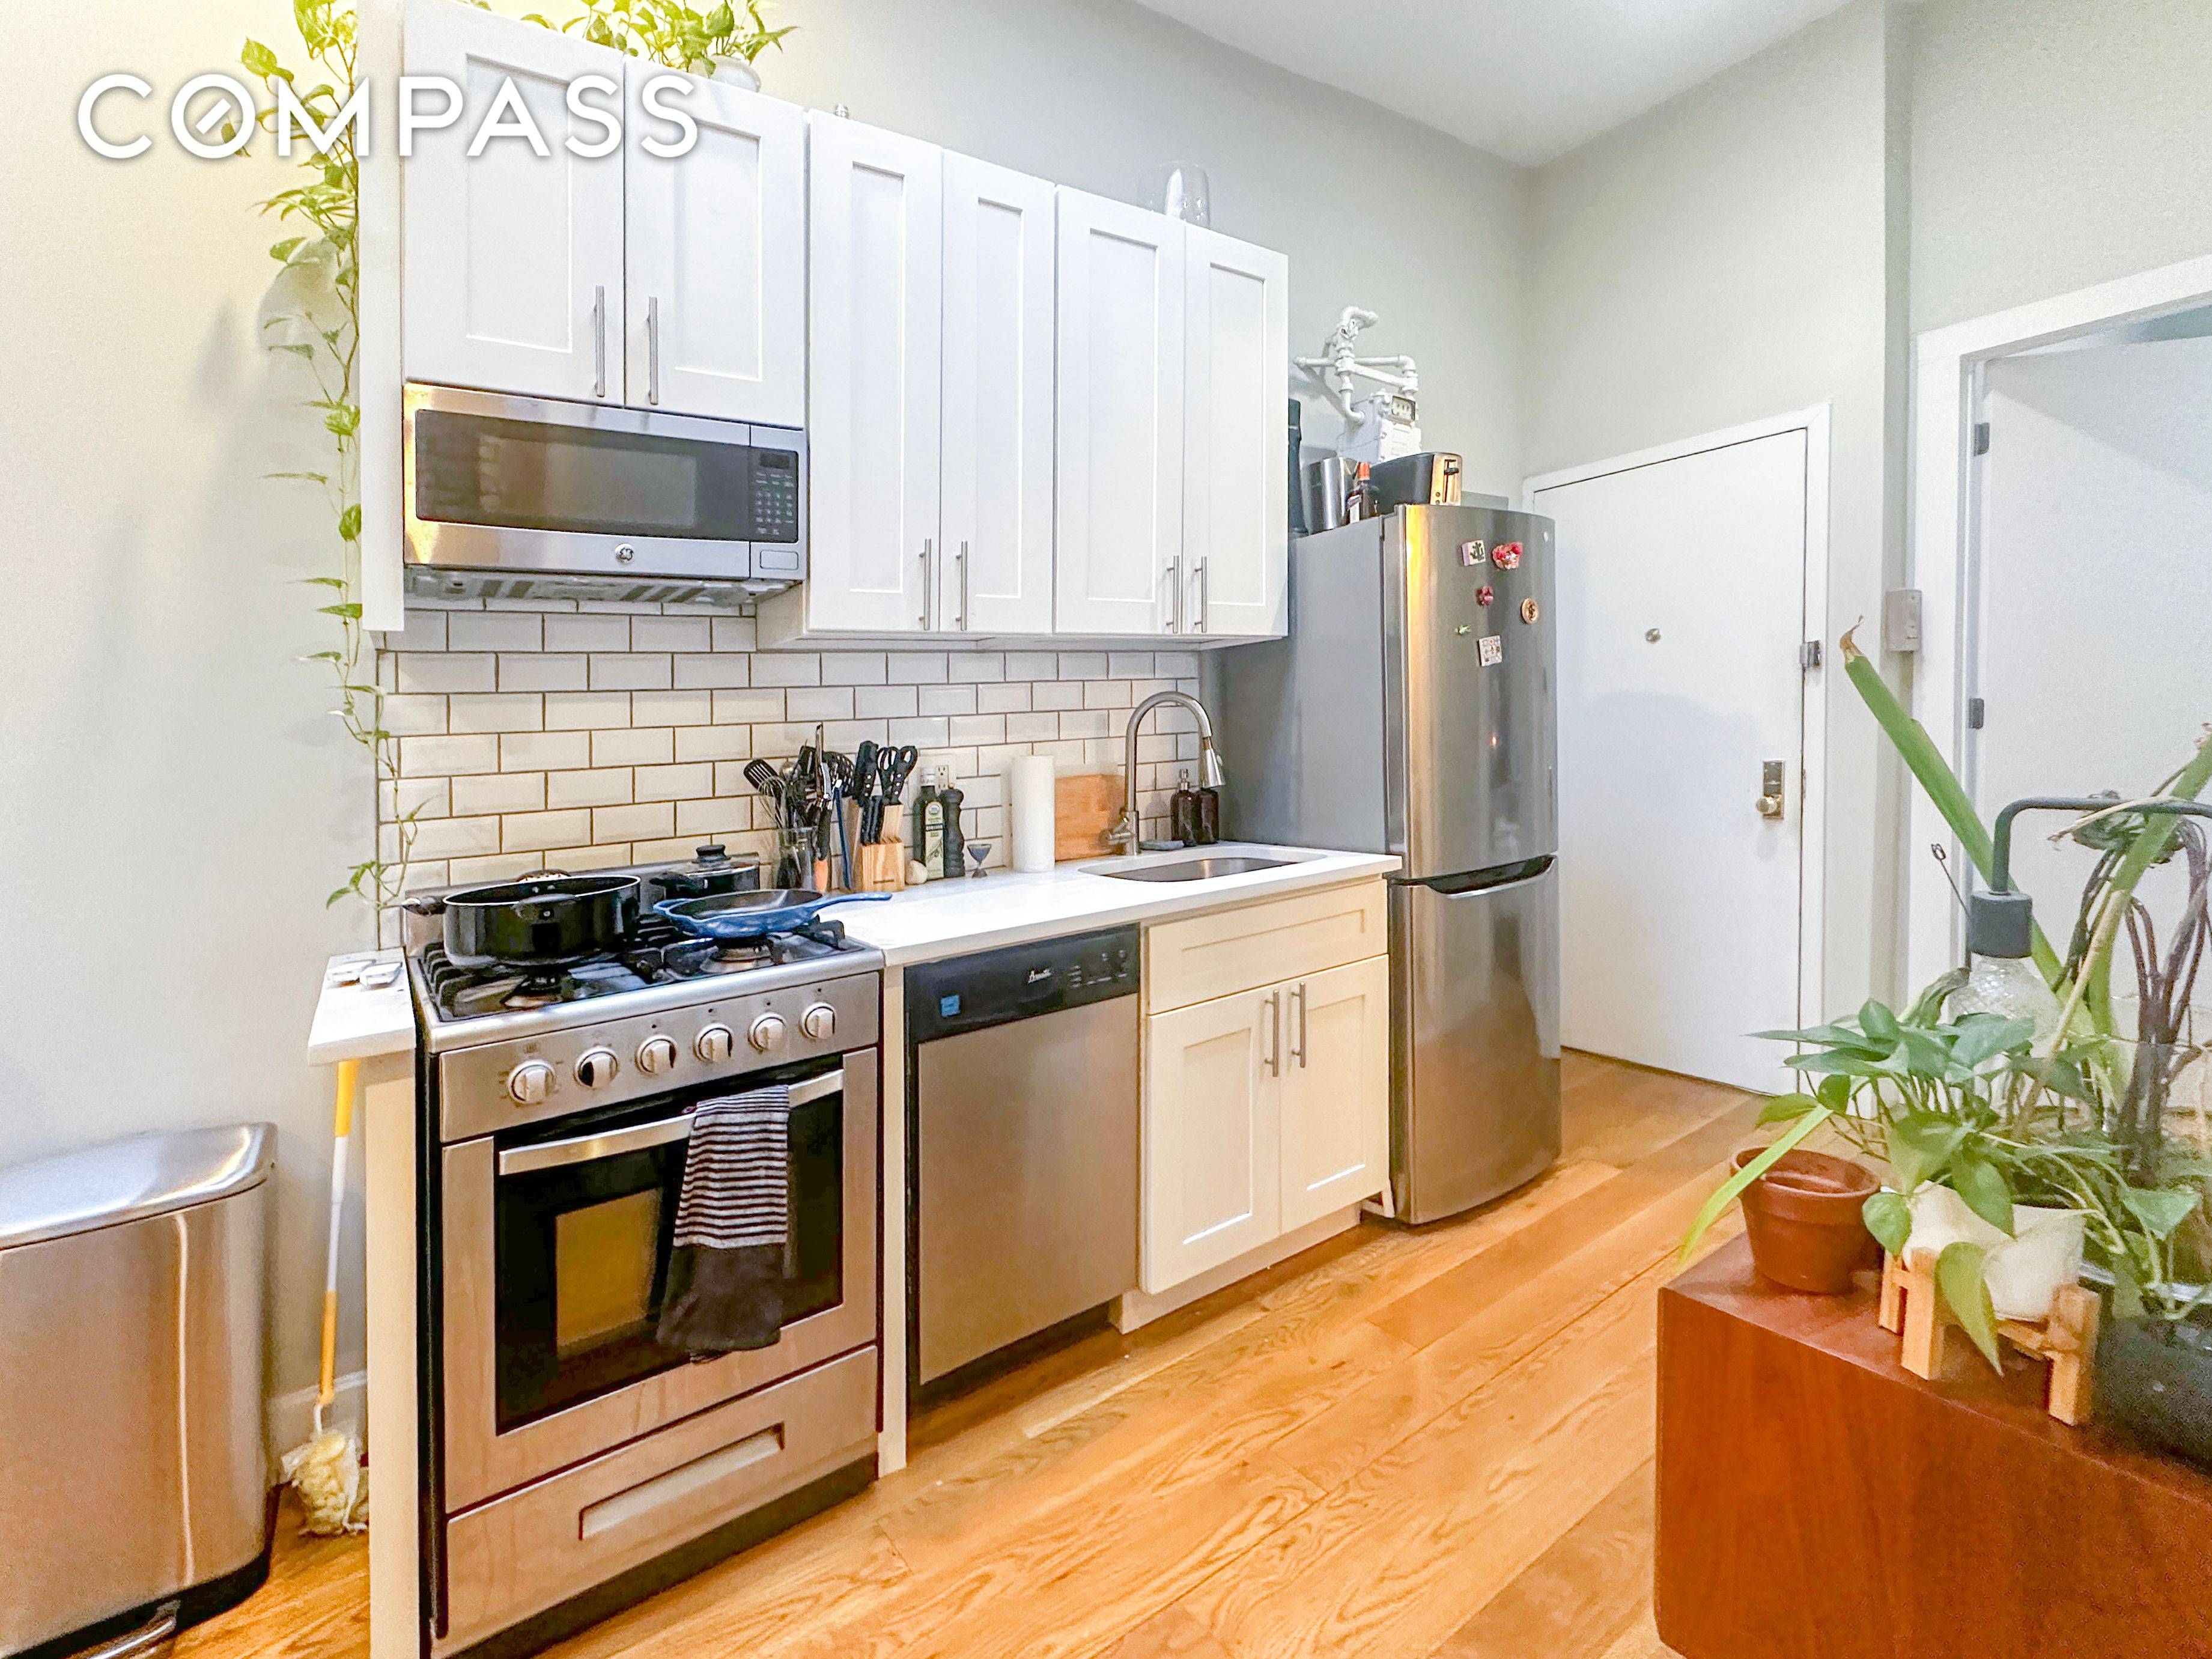 Prime Nolita SoHo 2 bedroom 1 bath with Skylights and extra TALL ceilings for a lofty feel and lots of natural light Renovated kitchen and stainless steel appliances.